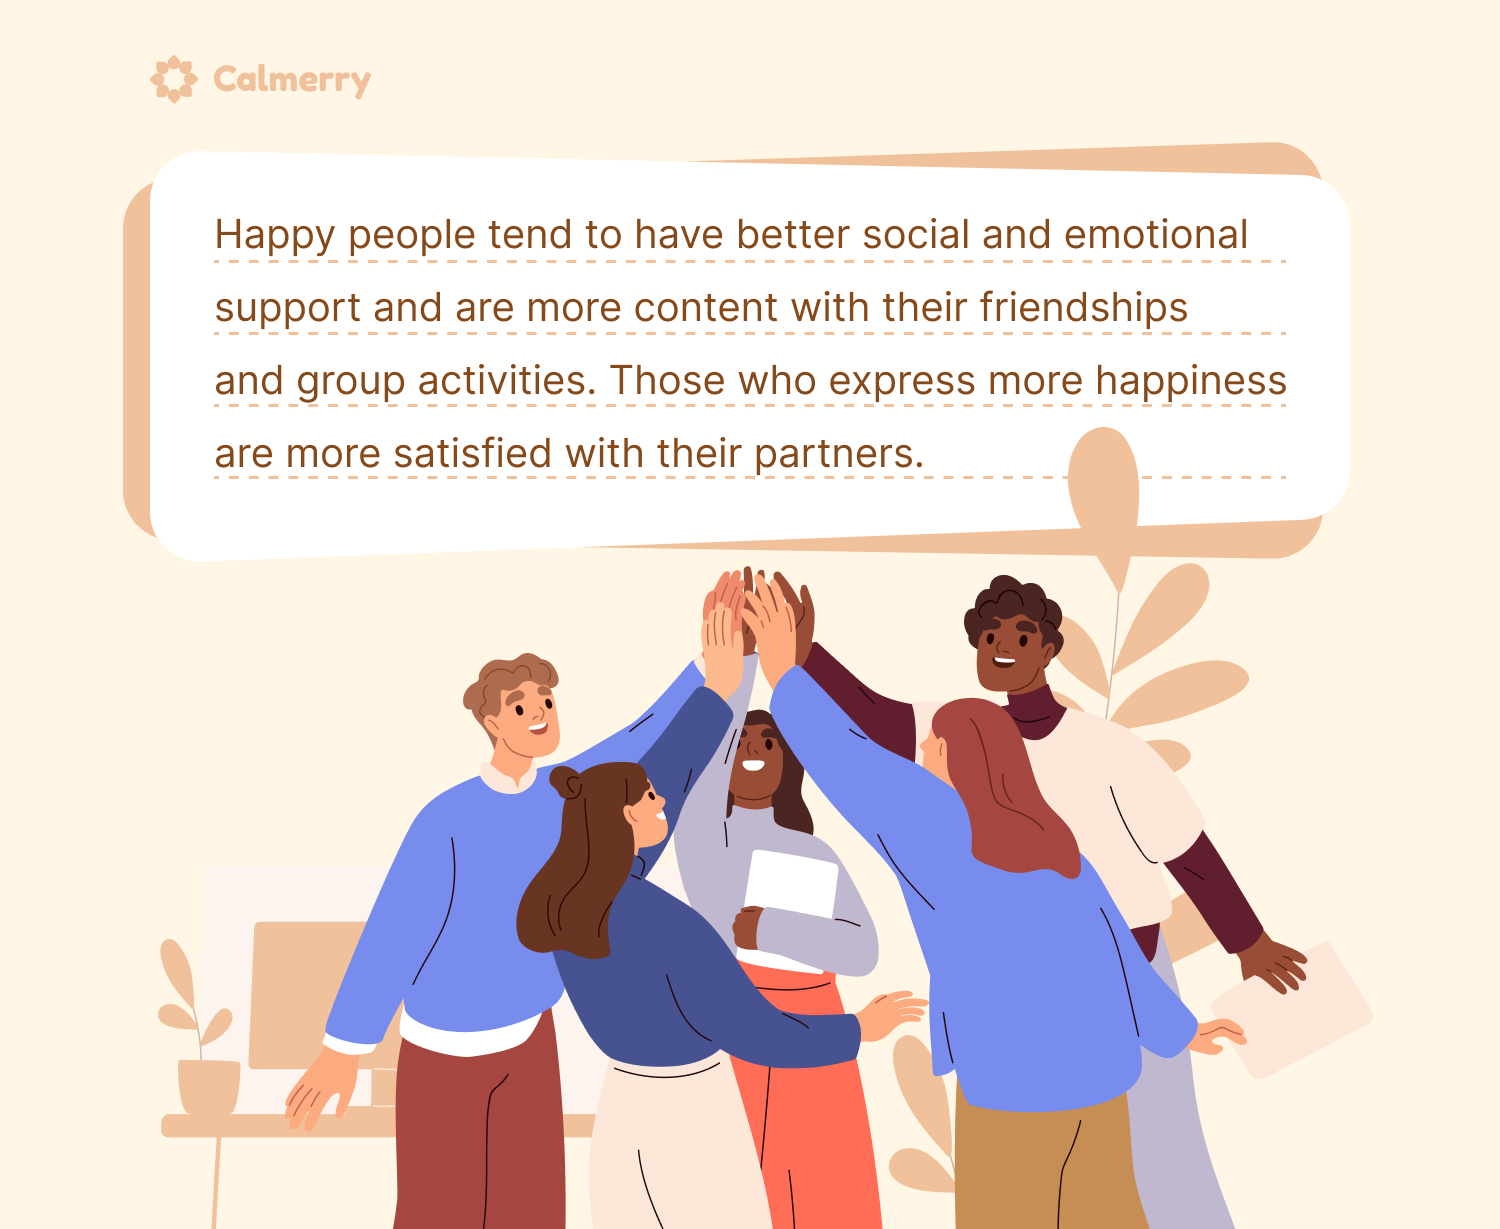 Happiness helps people maintain healthier and stronger bonds